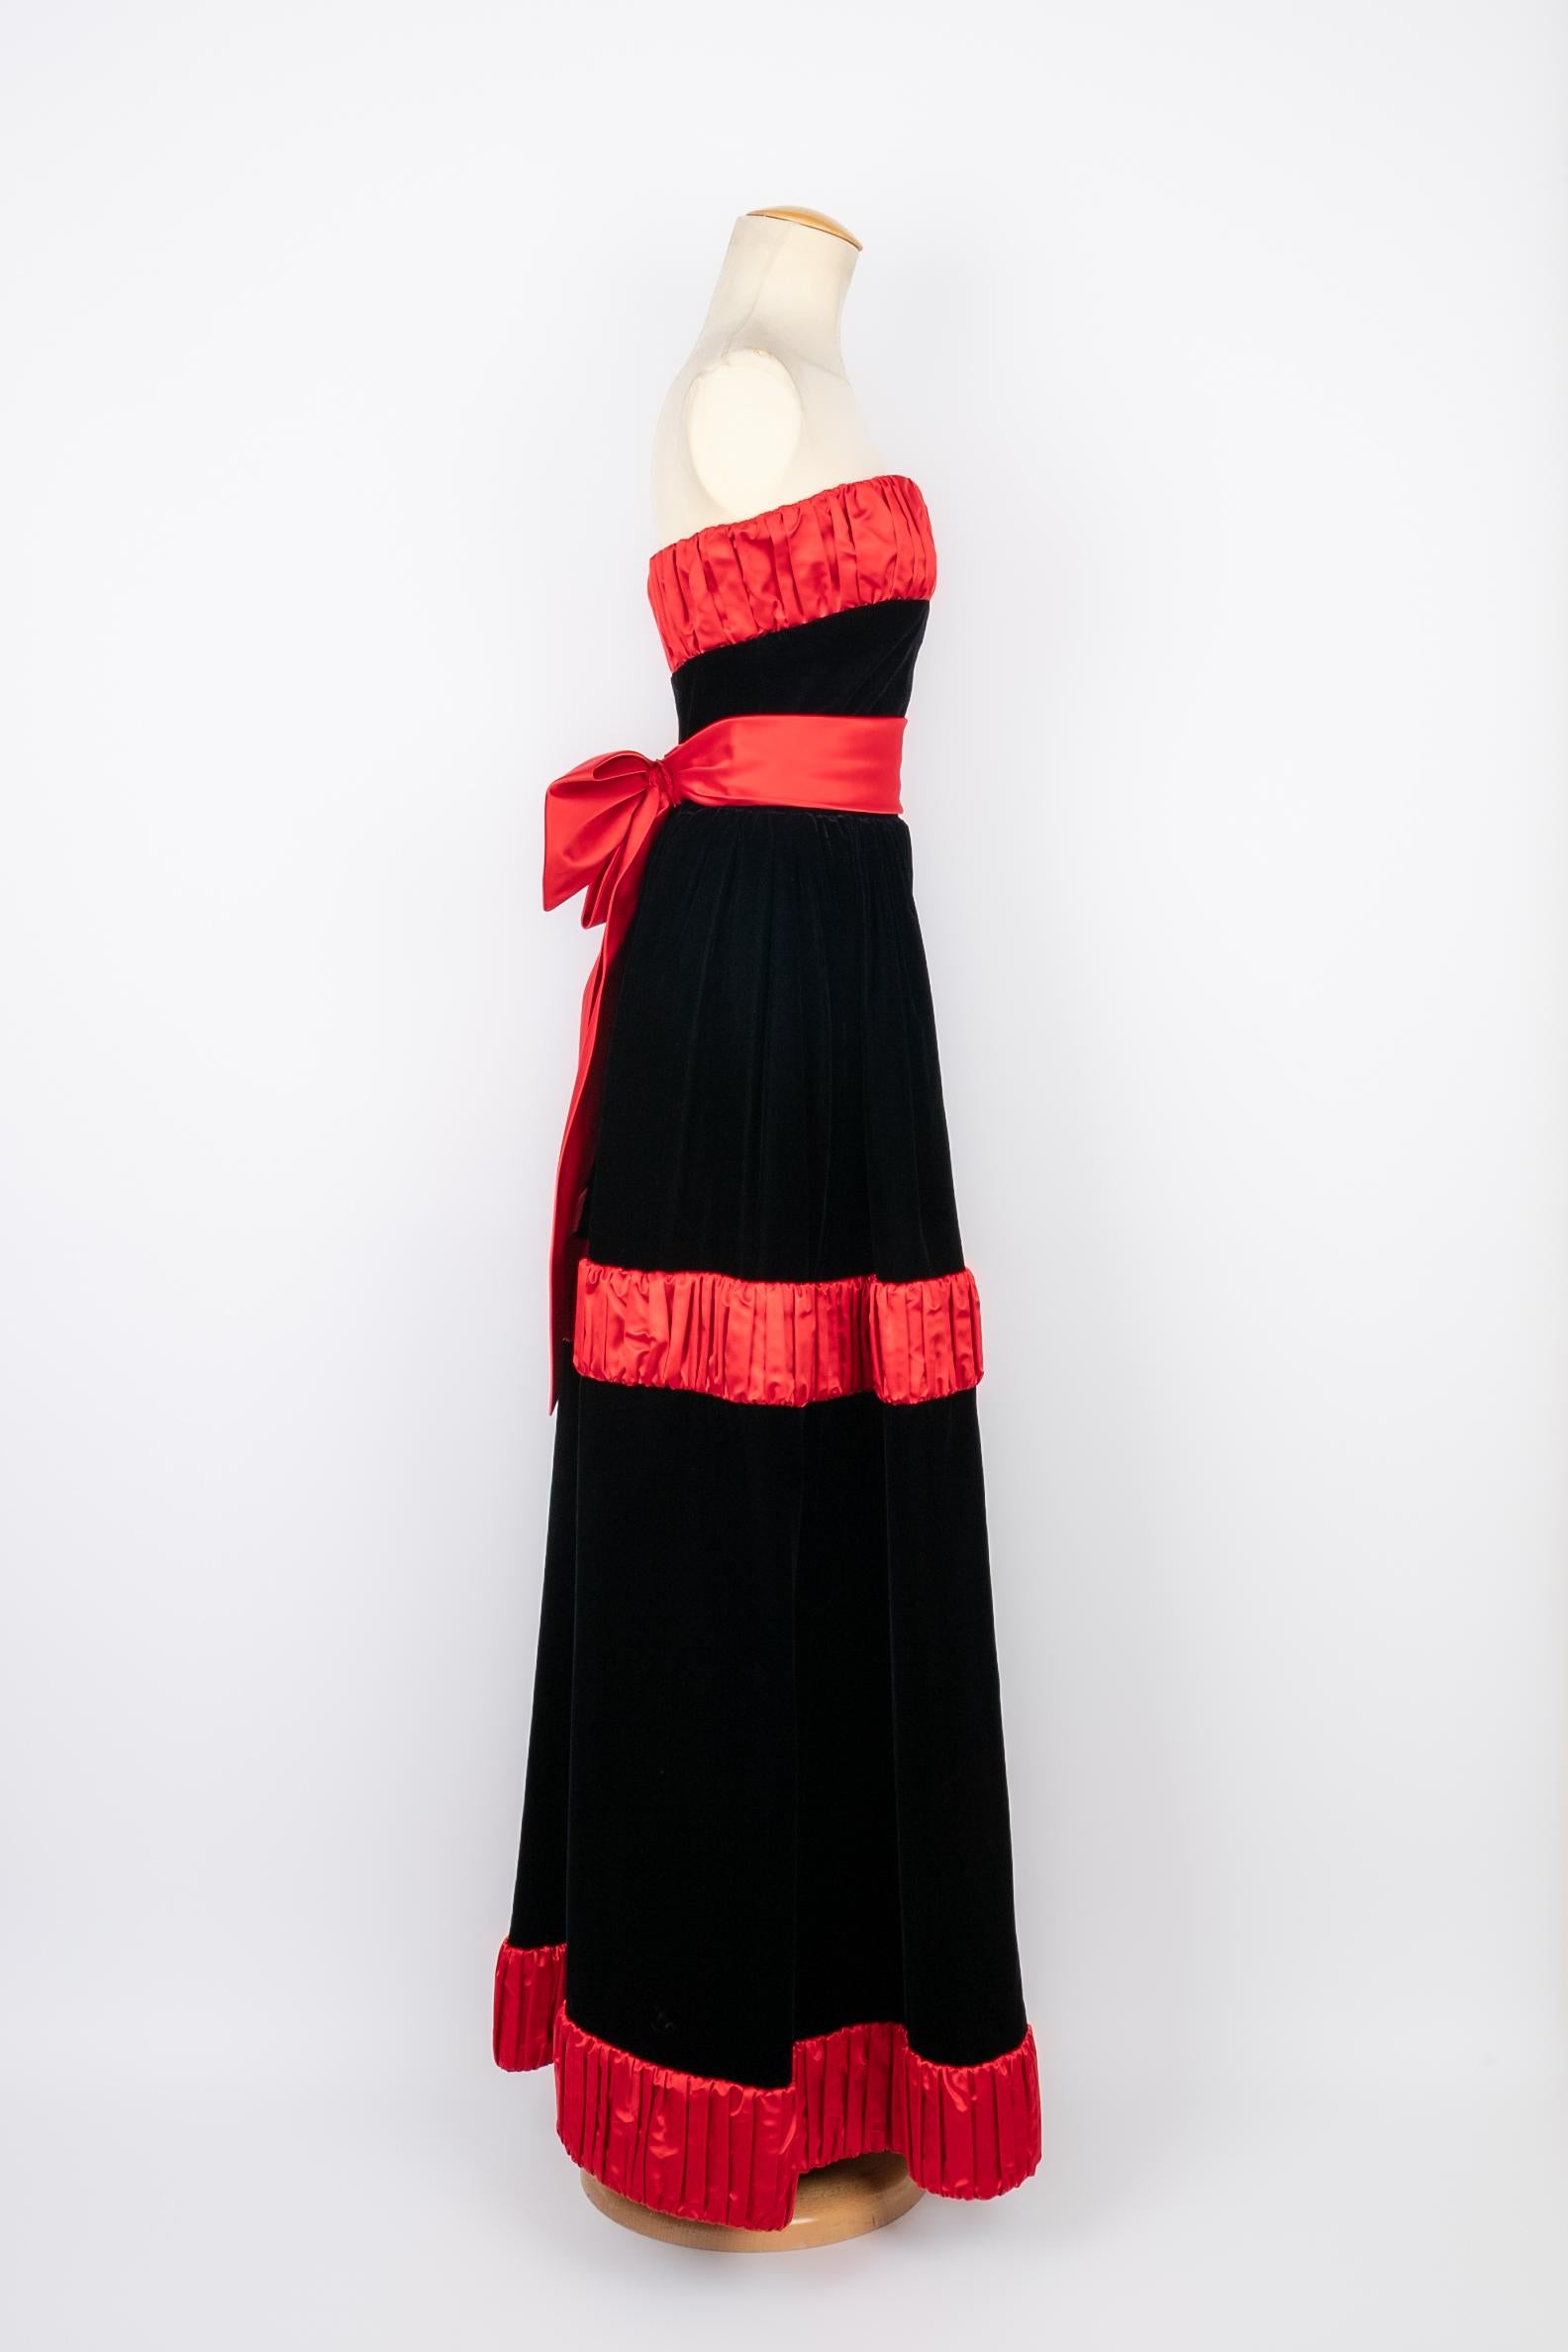 GIVENCHY HAUTE COUTURE - (Made in France) Red silk and black velvet bustier dress. No size indicated, it fits a 34FR/36FR.

Condition:
Very good condition

Dimensions:
Chest: 43 cm - Waist: 32 cm - Hips: 38 cm - Length: 133 cm

VR29